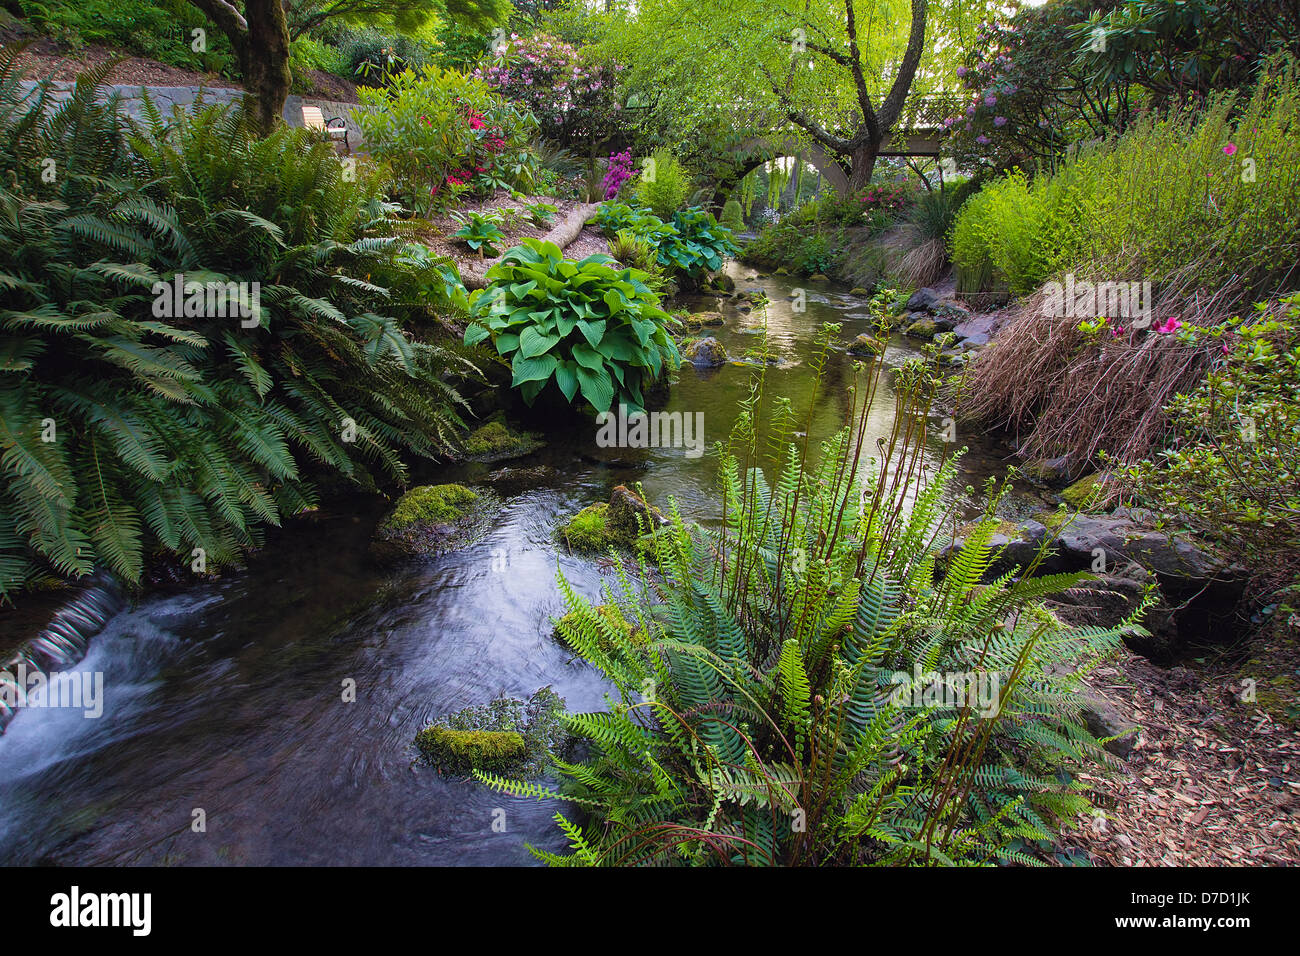 Stream Flowing Under the Wooden Bridge Arches with Ferns Hostas and Bog Plants at Crystal Springs Rhododendron Garden Stock Photo